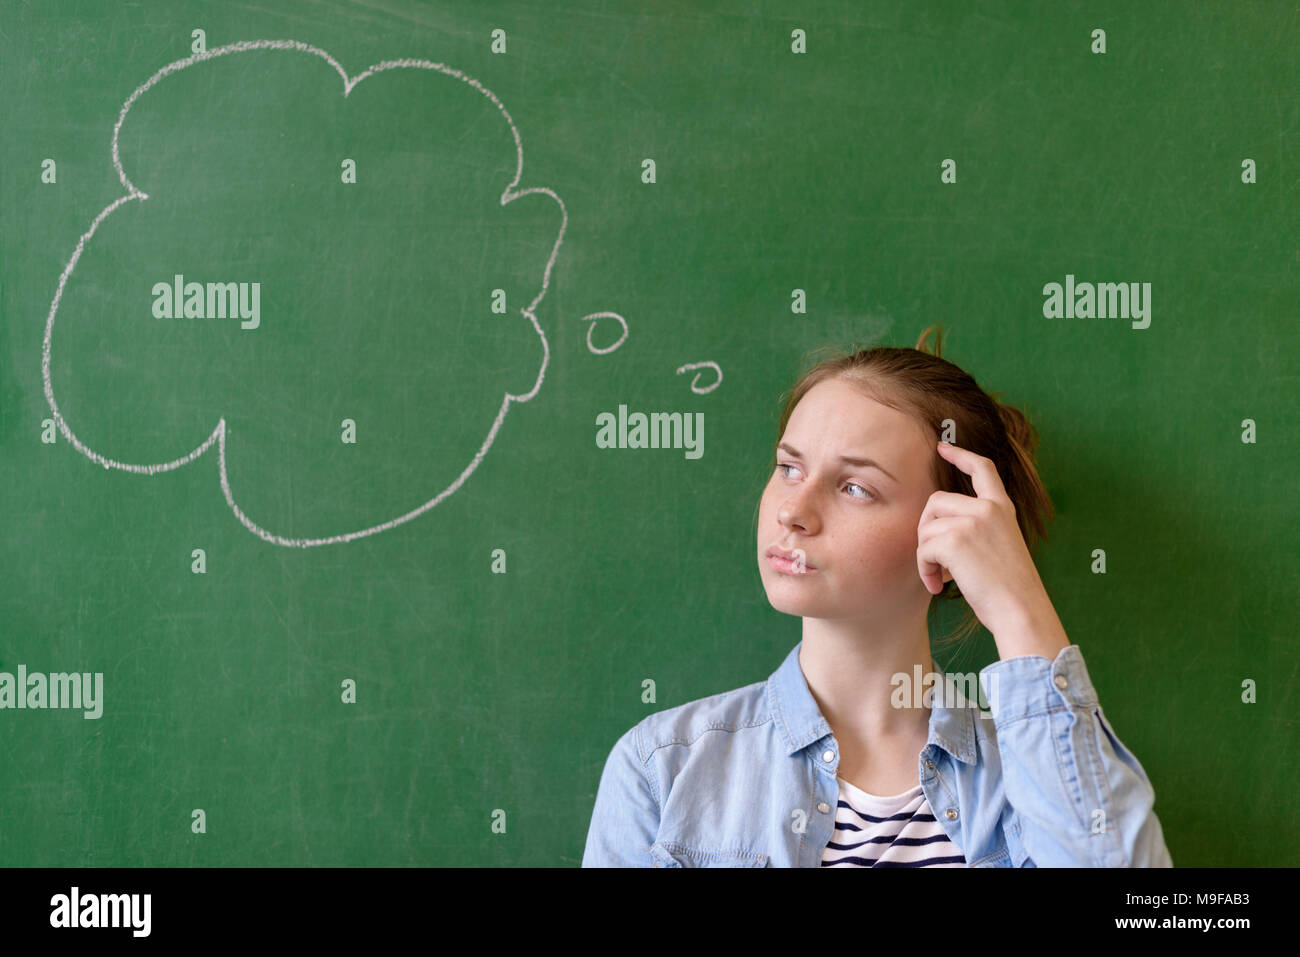 Student thinking blackboard concept. Pensive girl looking at thought bubble on chalkboard background. Caucasian student. Stock Photo